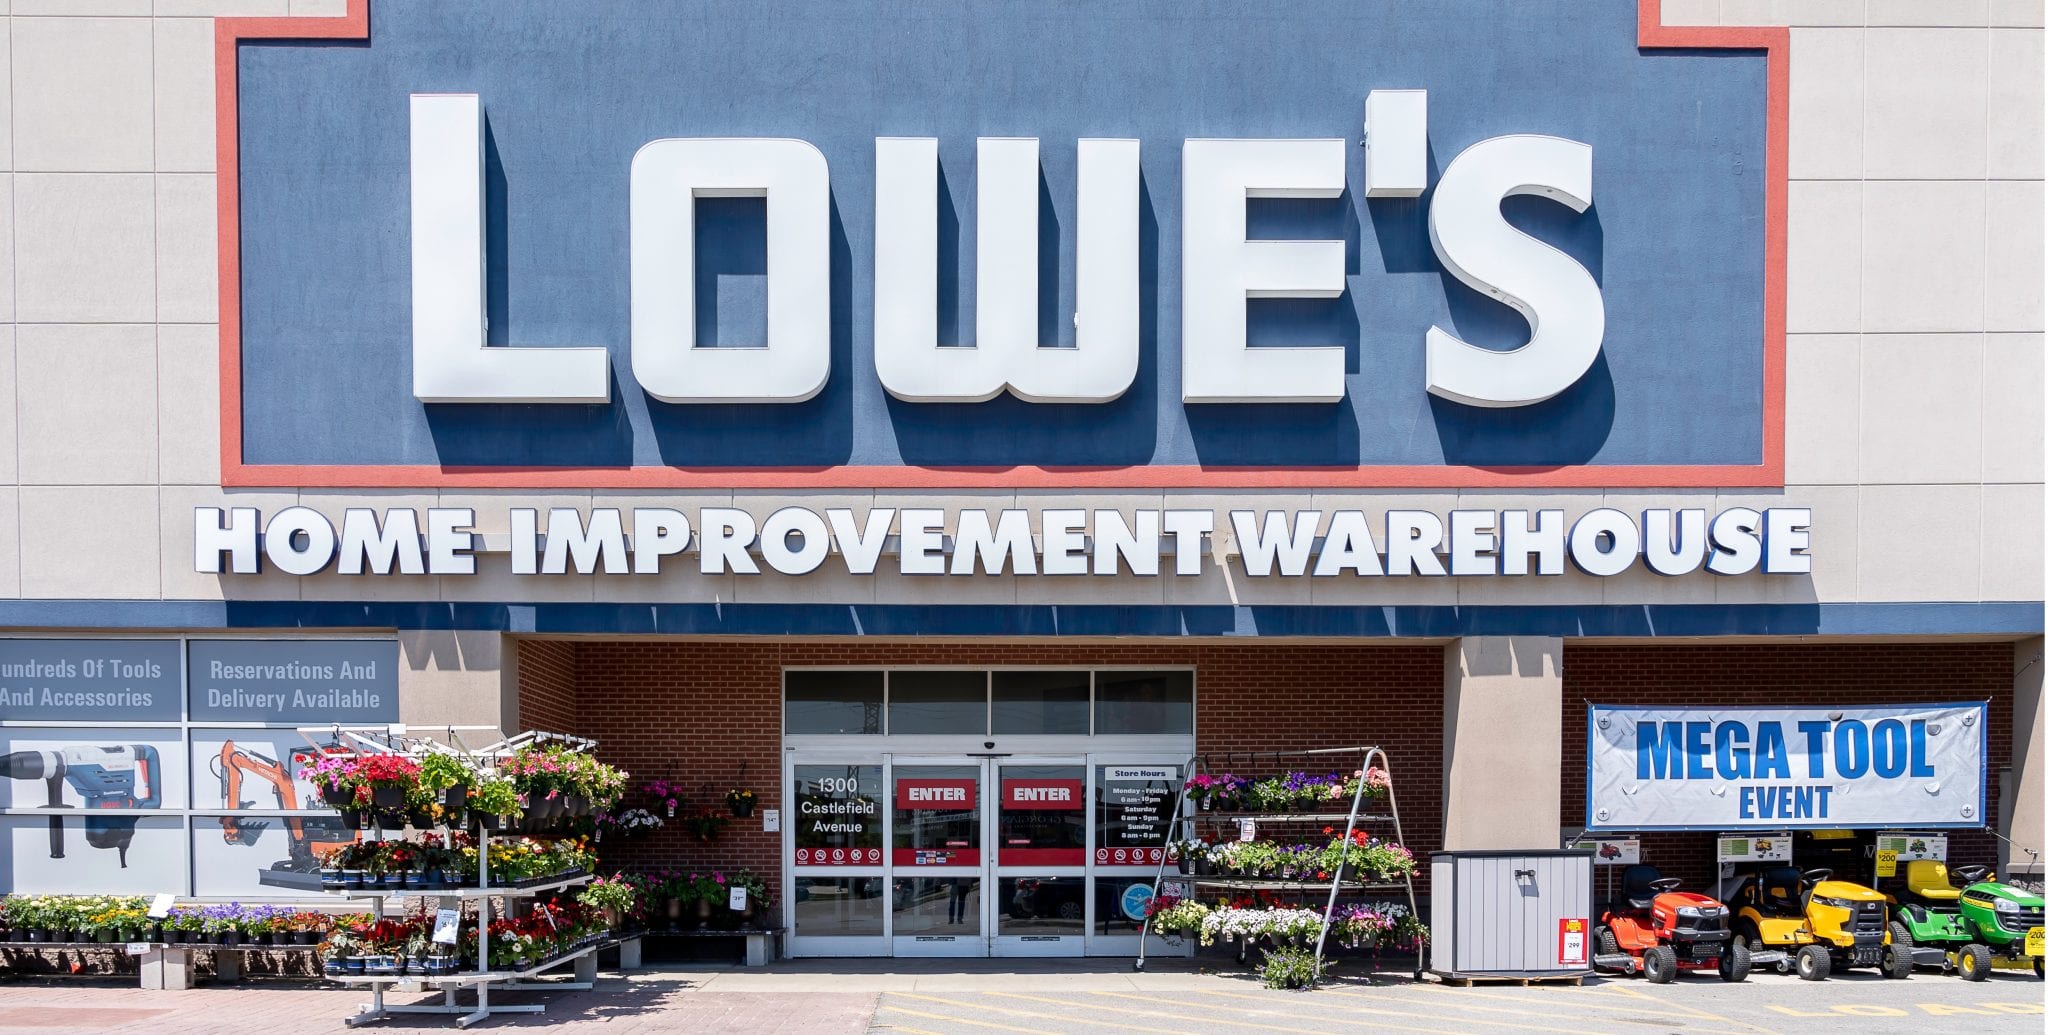 Sale at Lowes Home Improvement